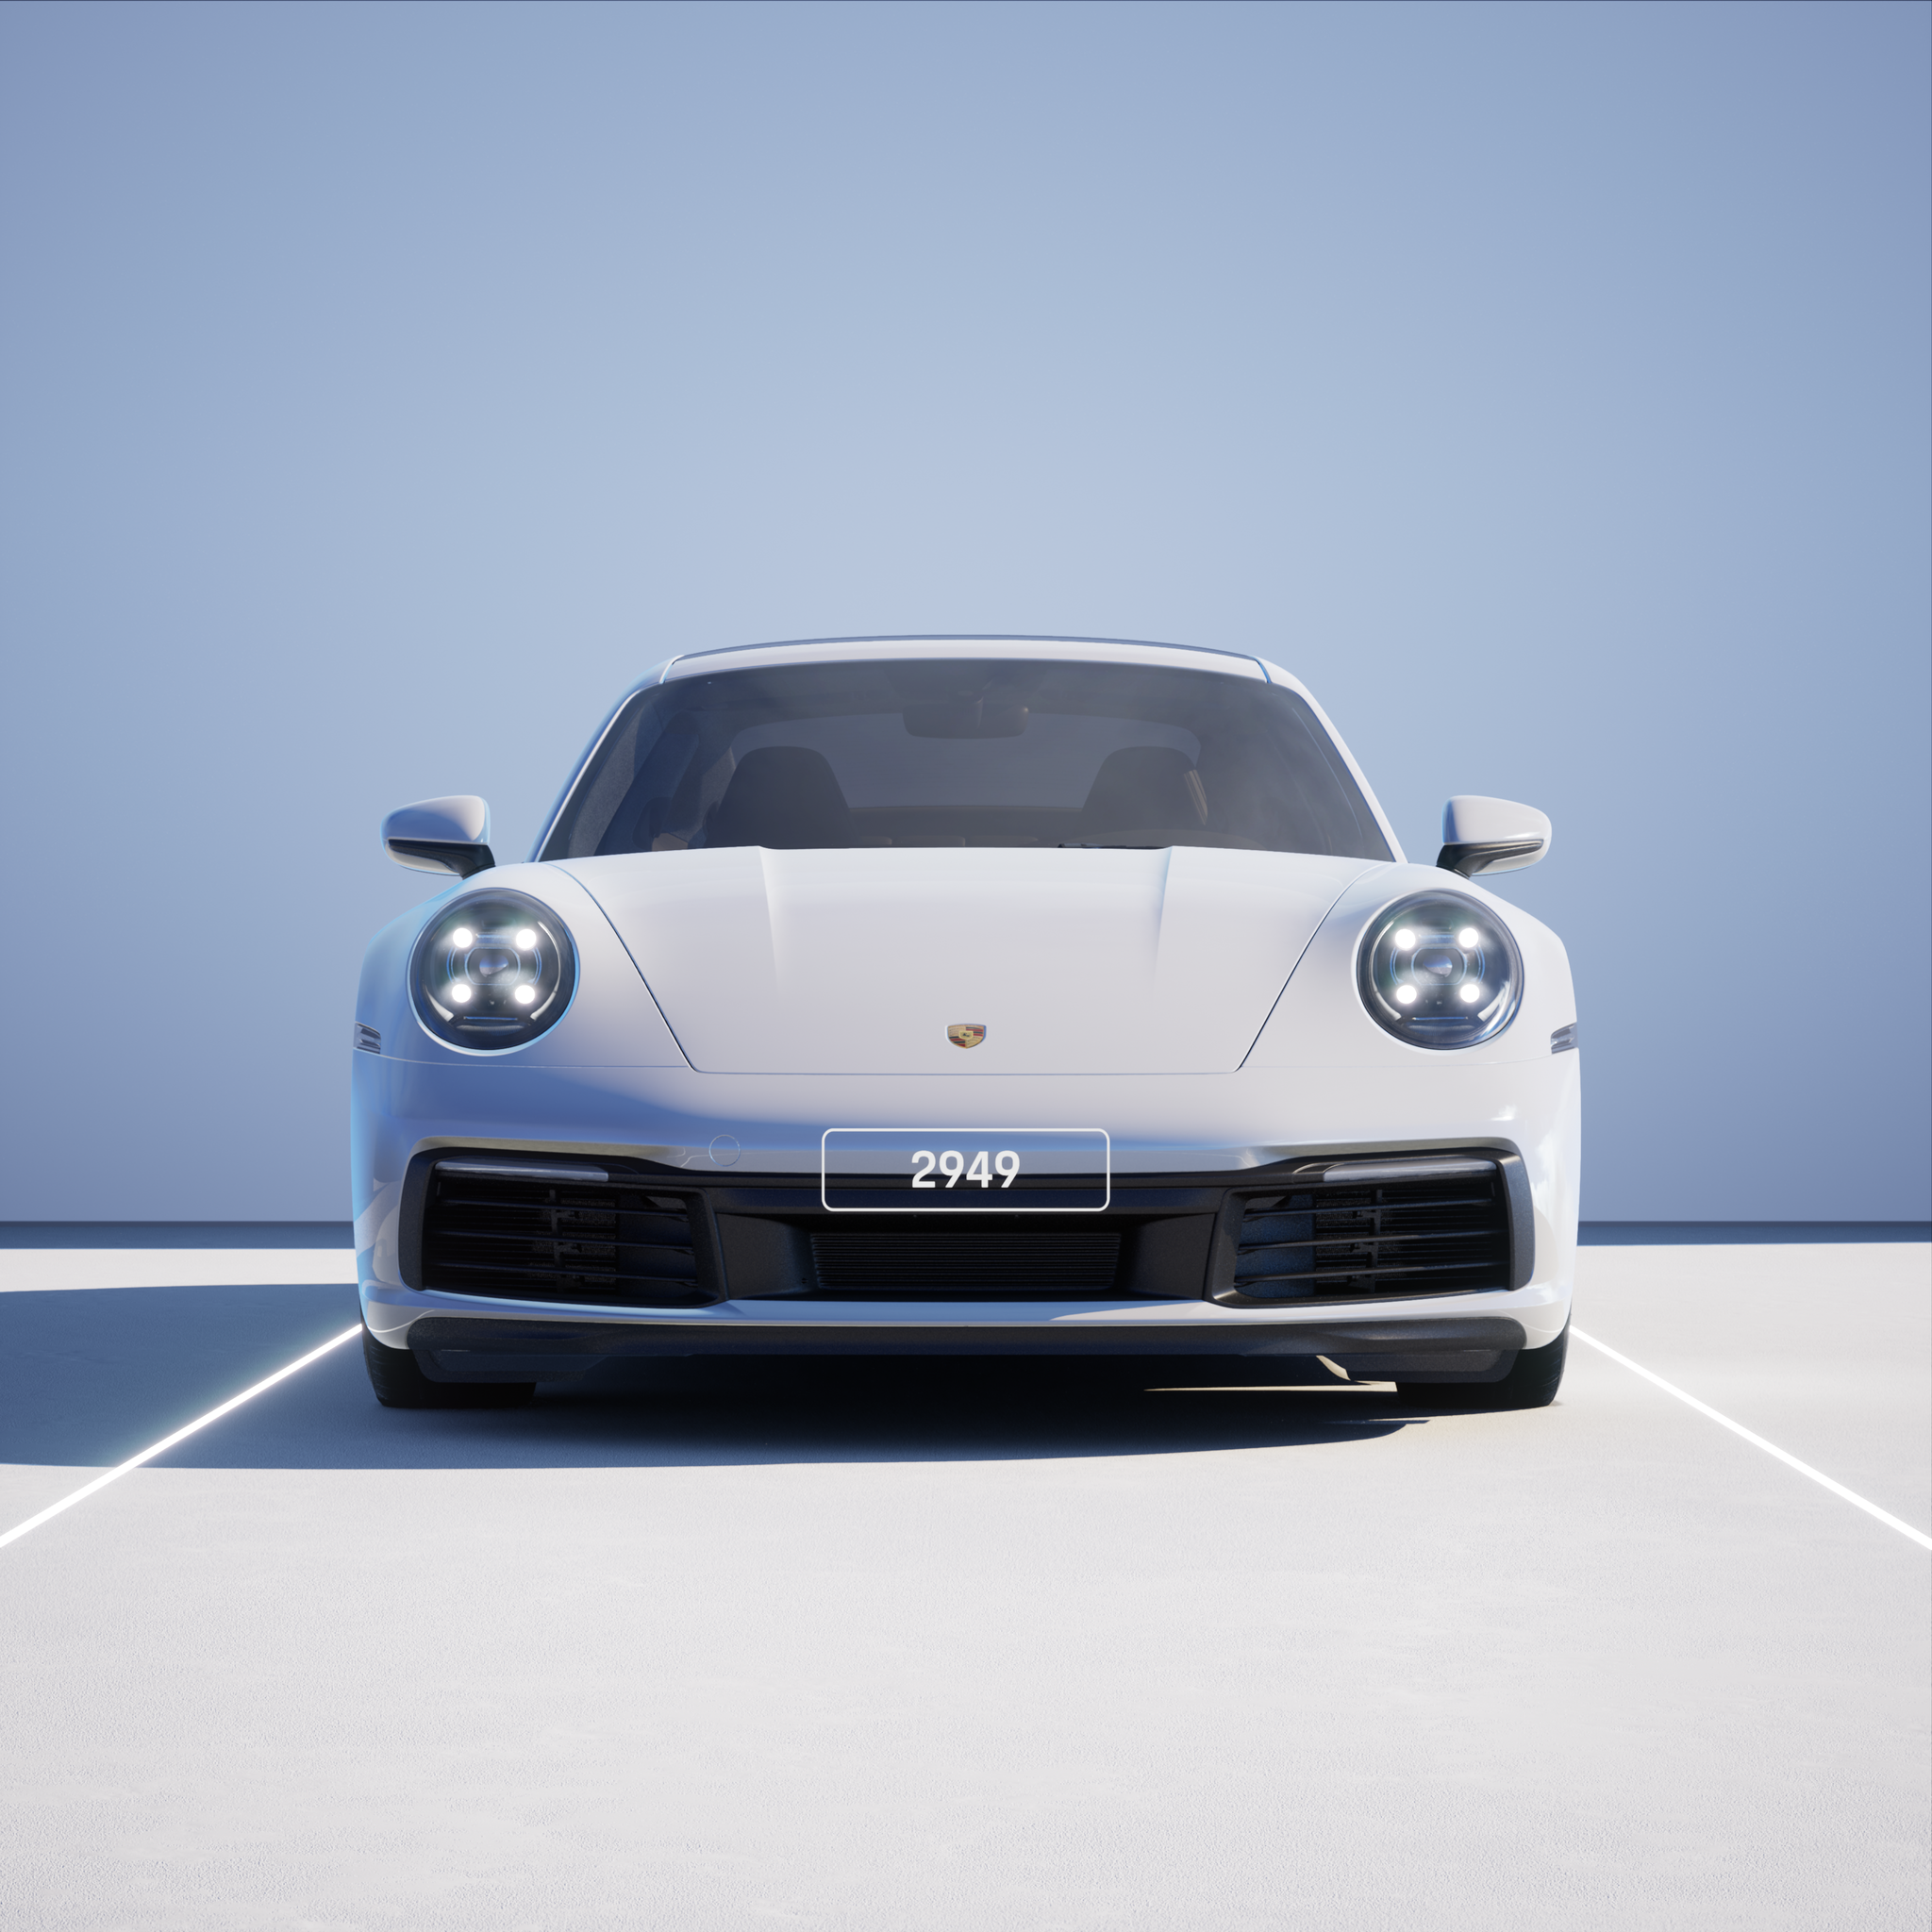 The PORSCHΞ 911 2949 image in phase